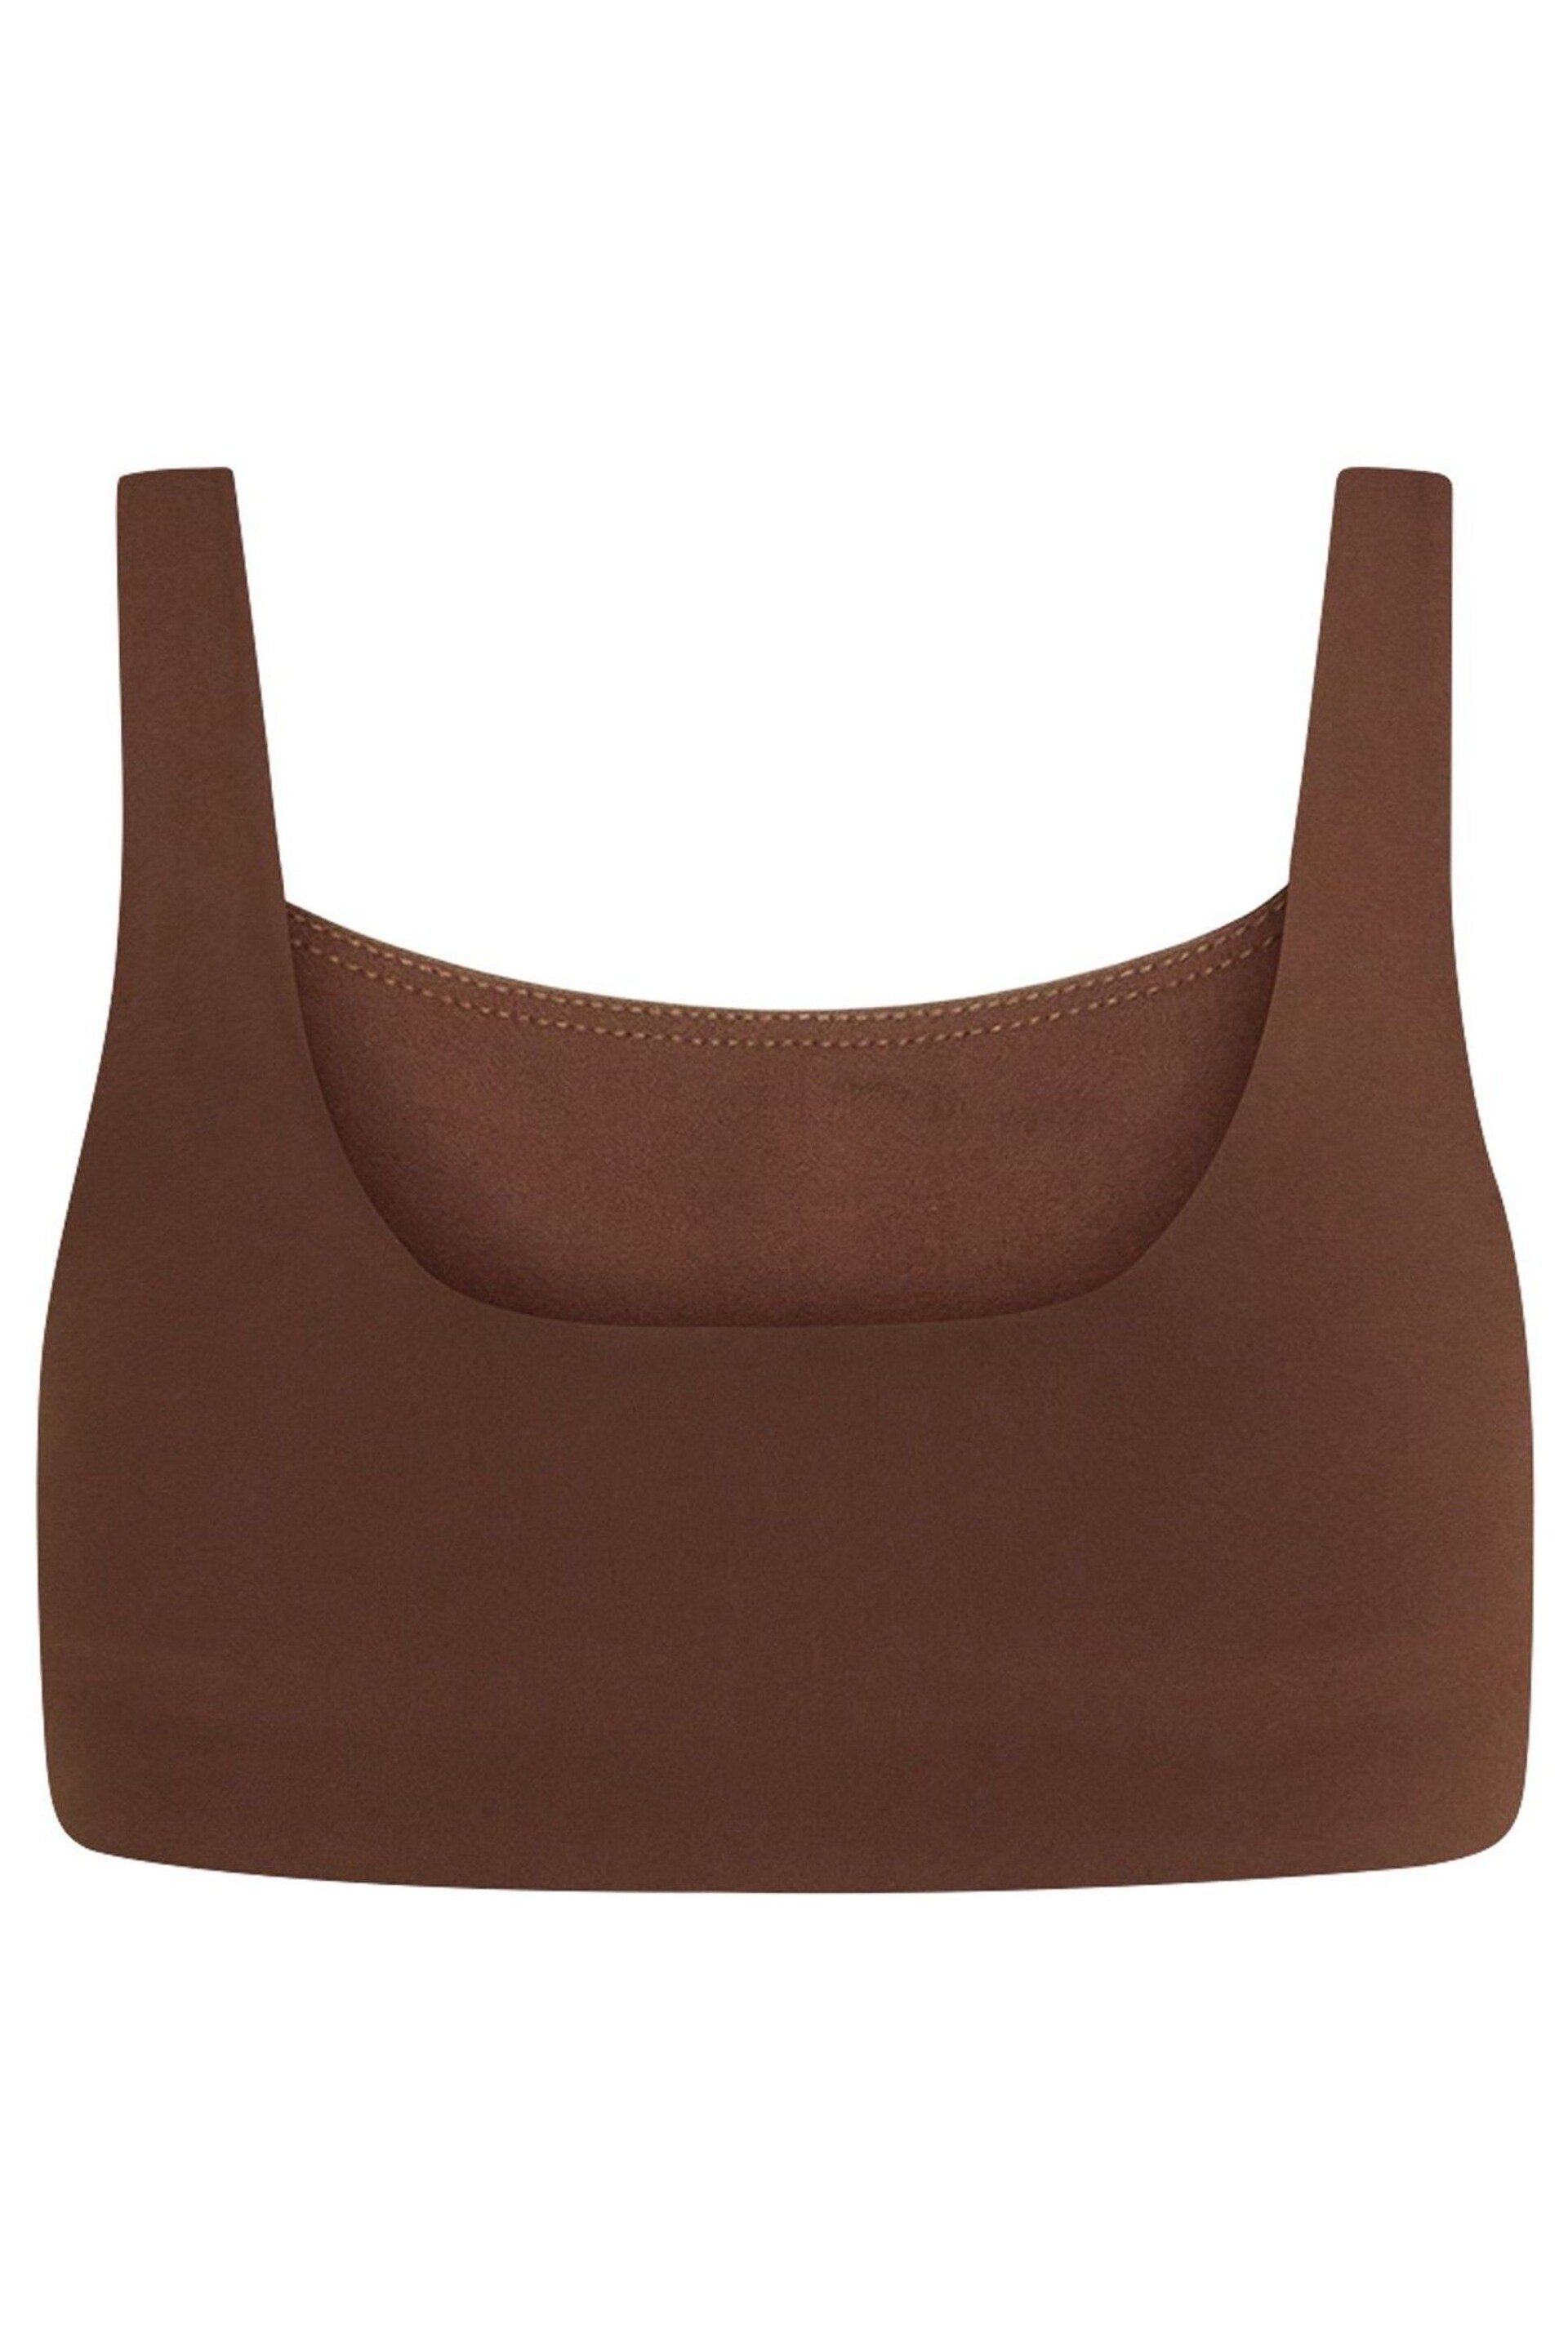 Girlfriend Collective Square Neck Tommy Bra - Image 5 of 5